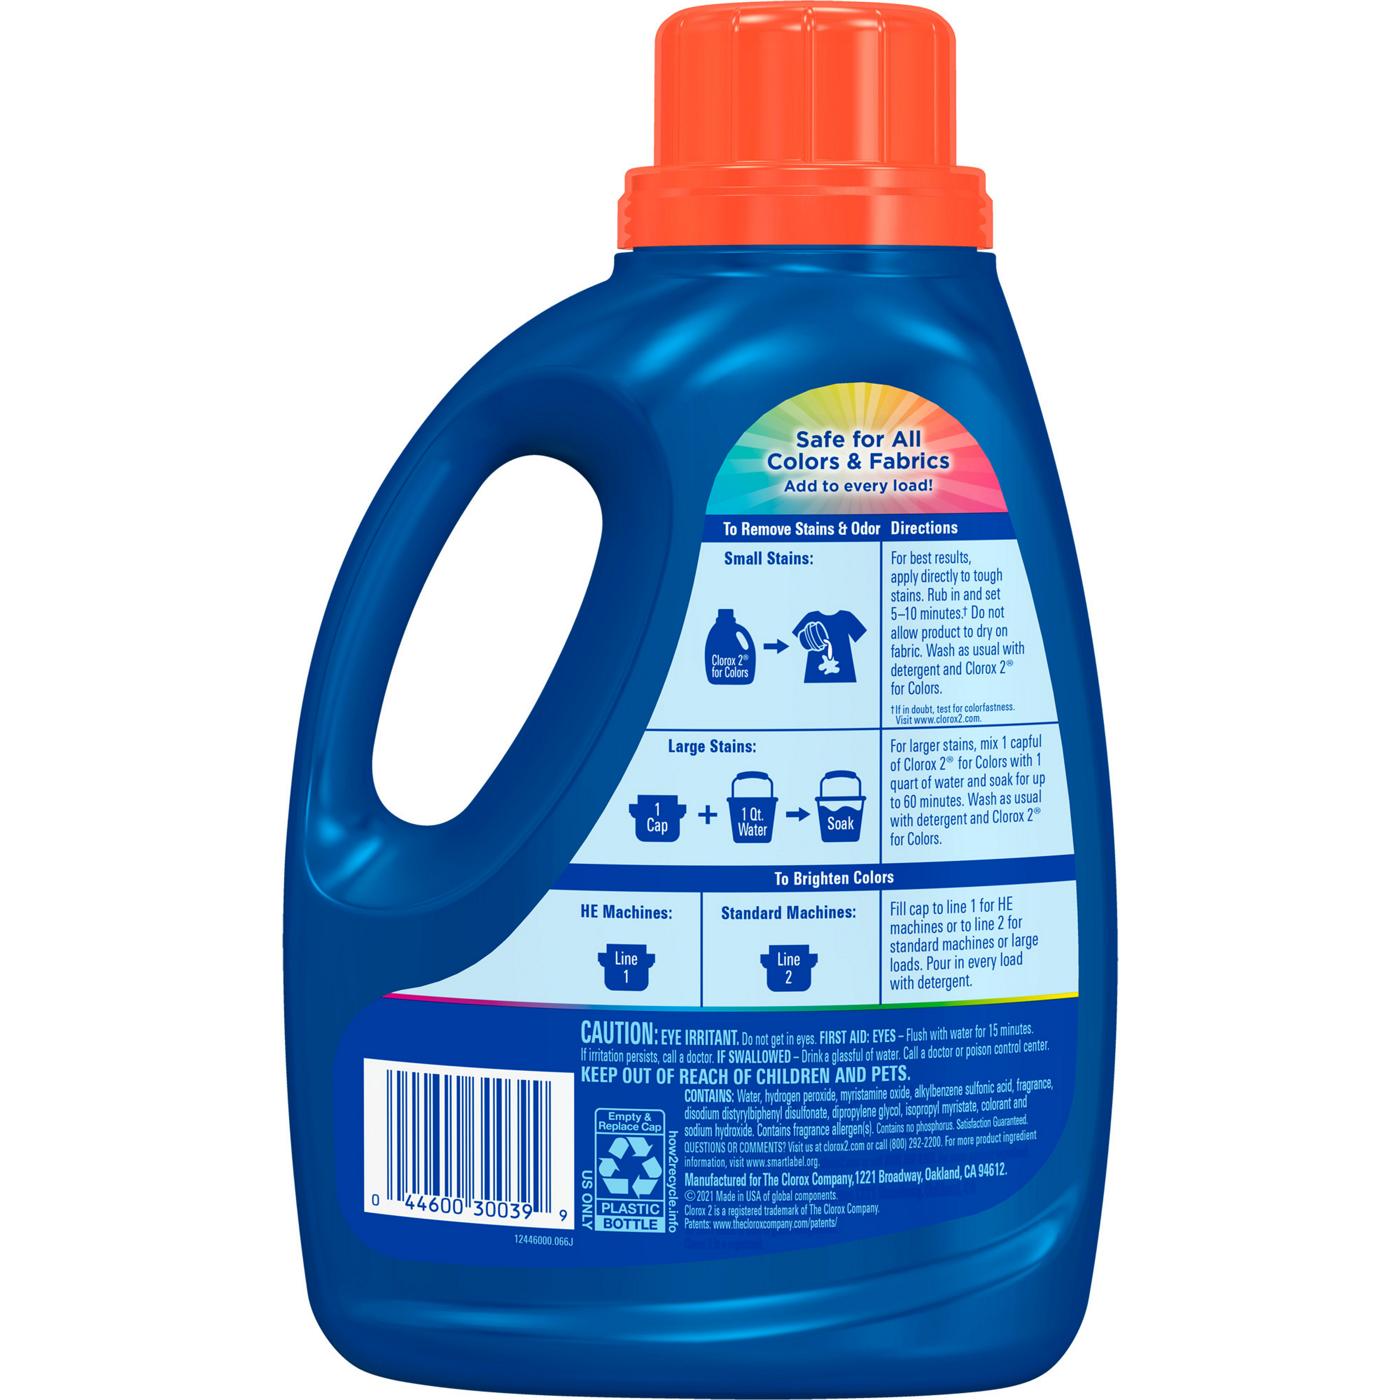 Clorox 2 2 for Colors 3-in-1 HE Laundry Additive, 48 Loads - Original; image 4 of 4